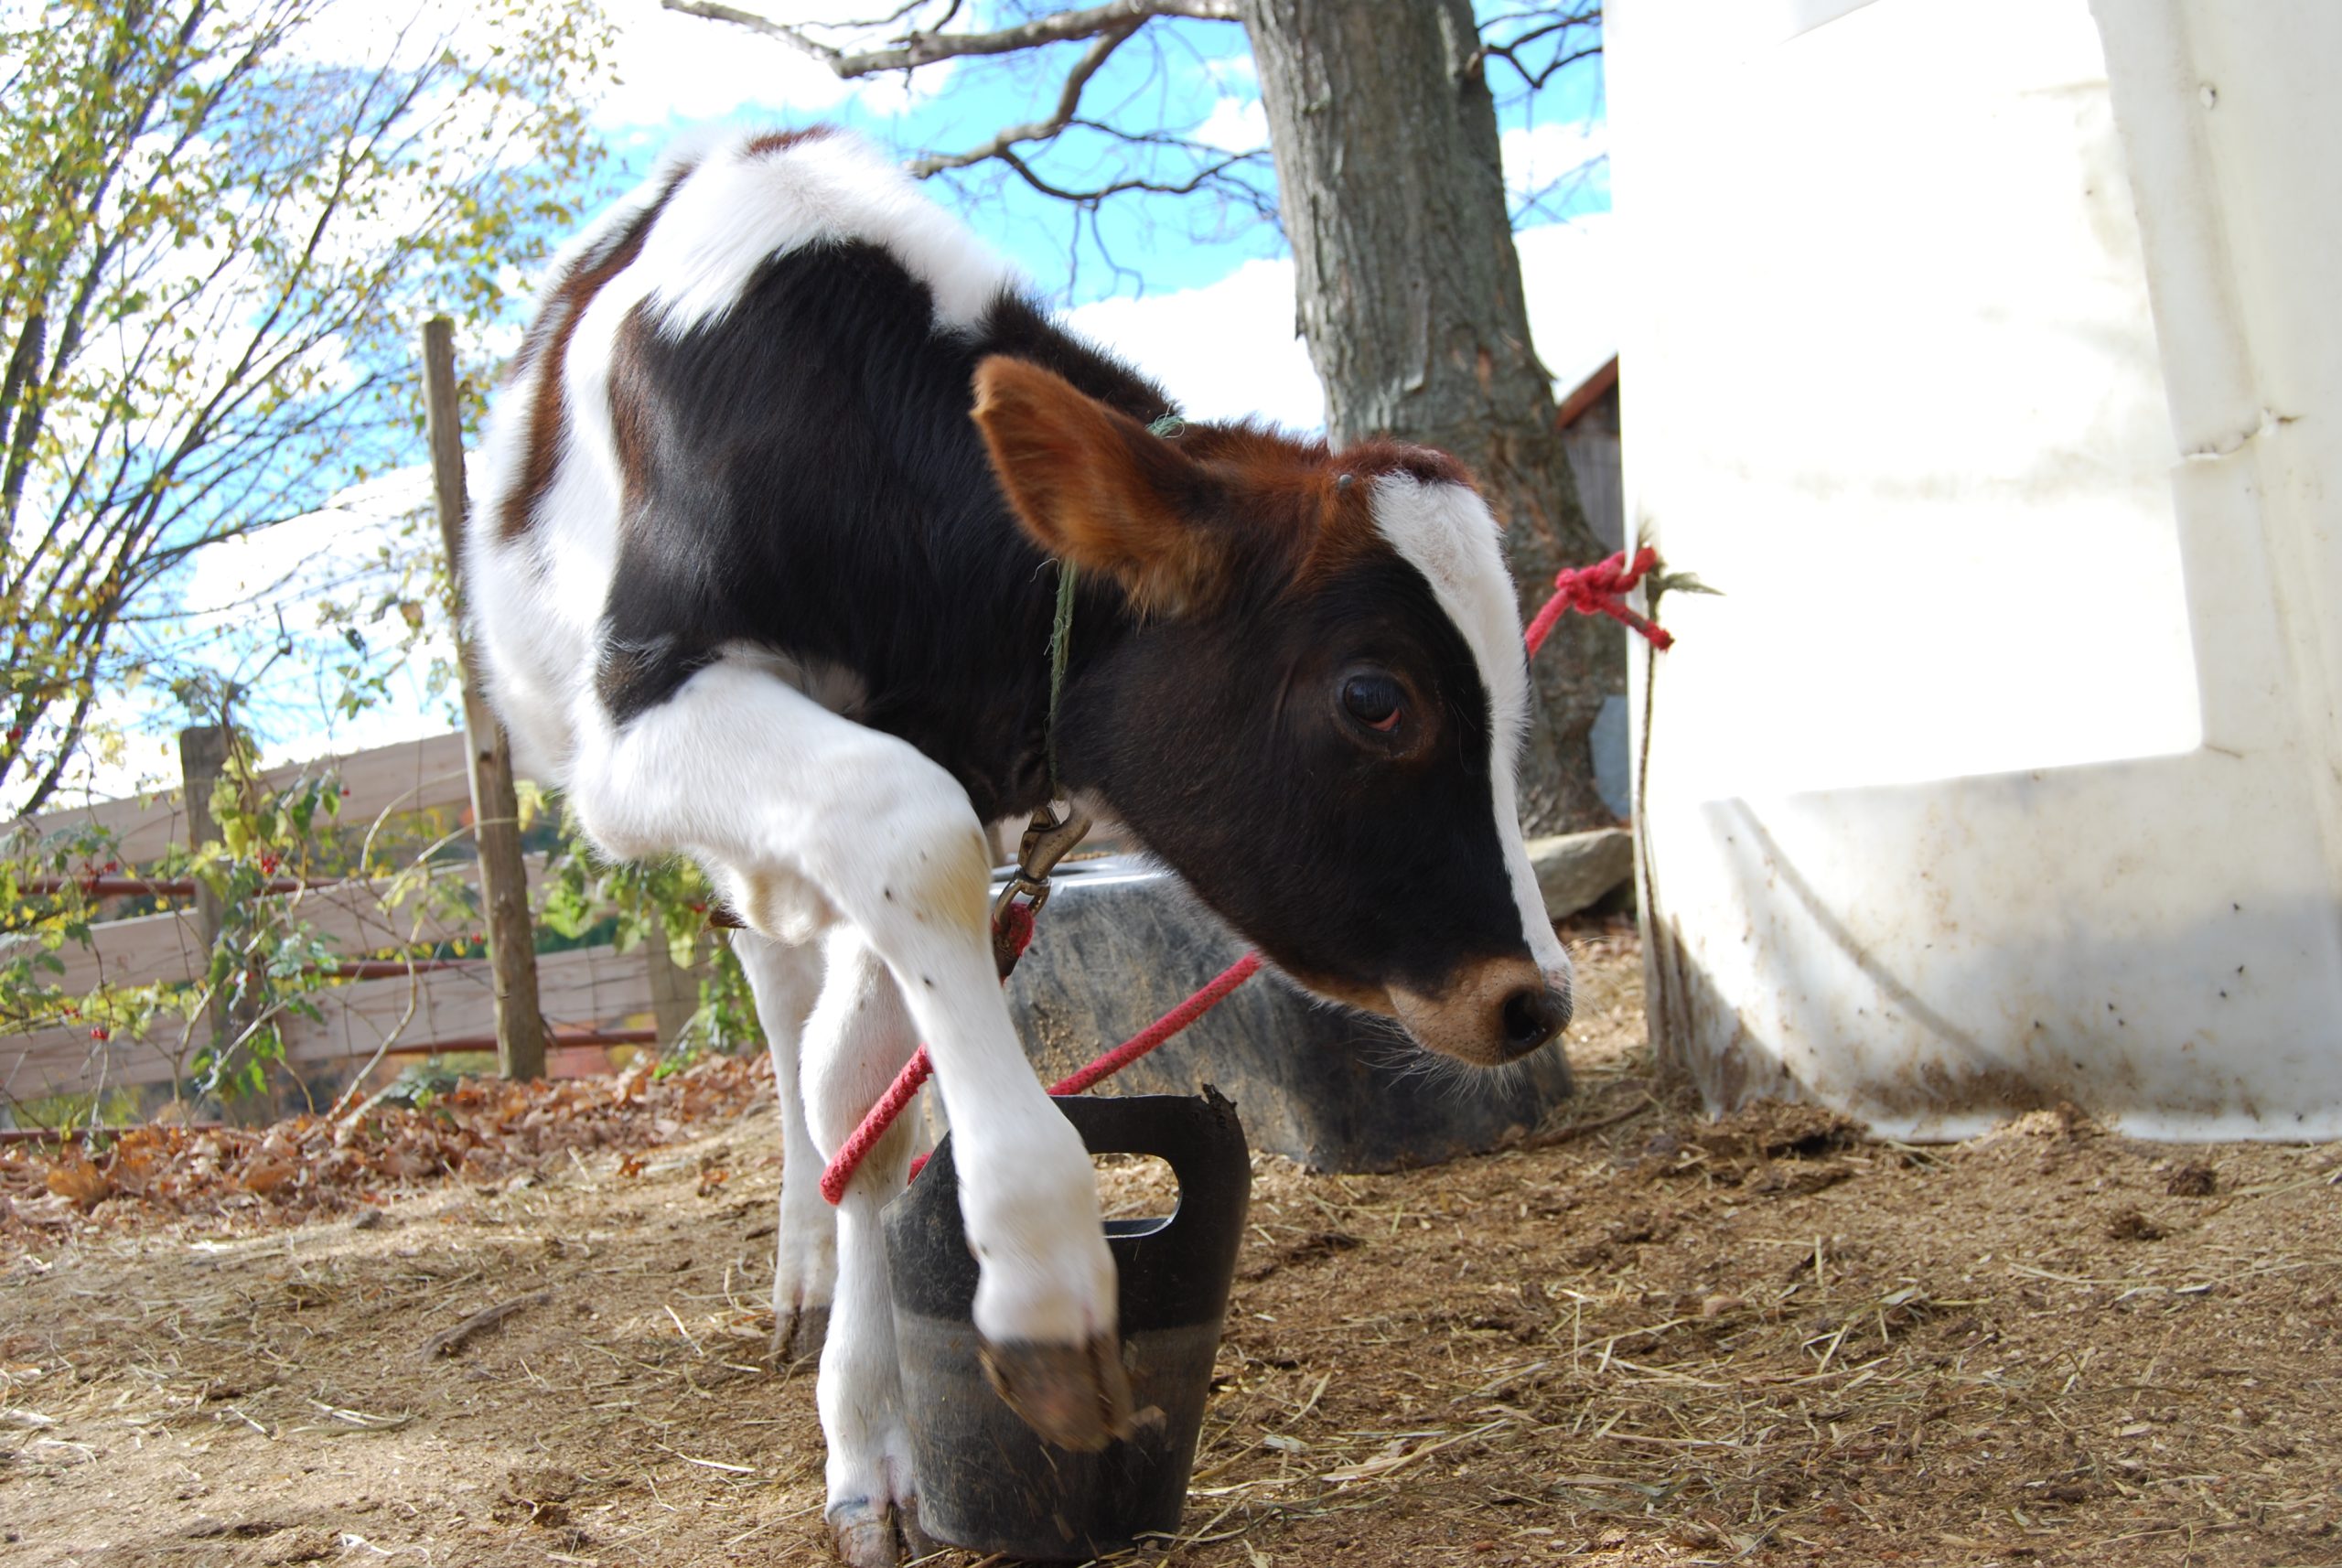 Playful Calf (user submitted)